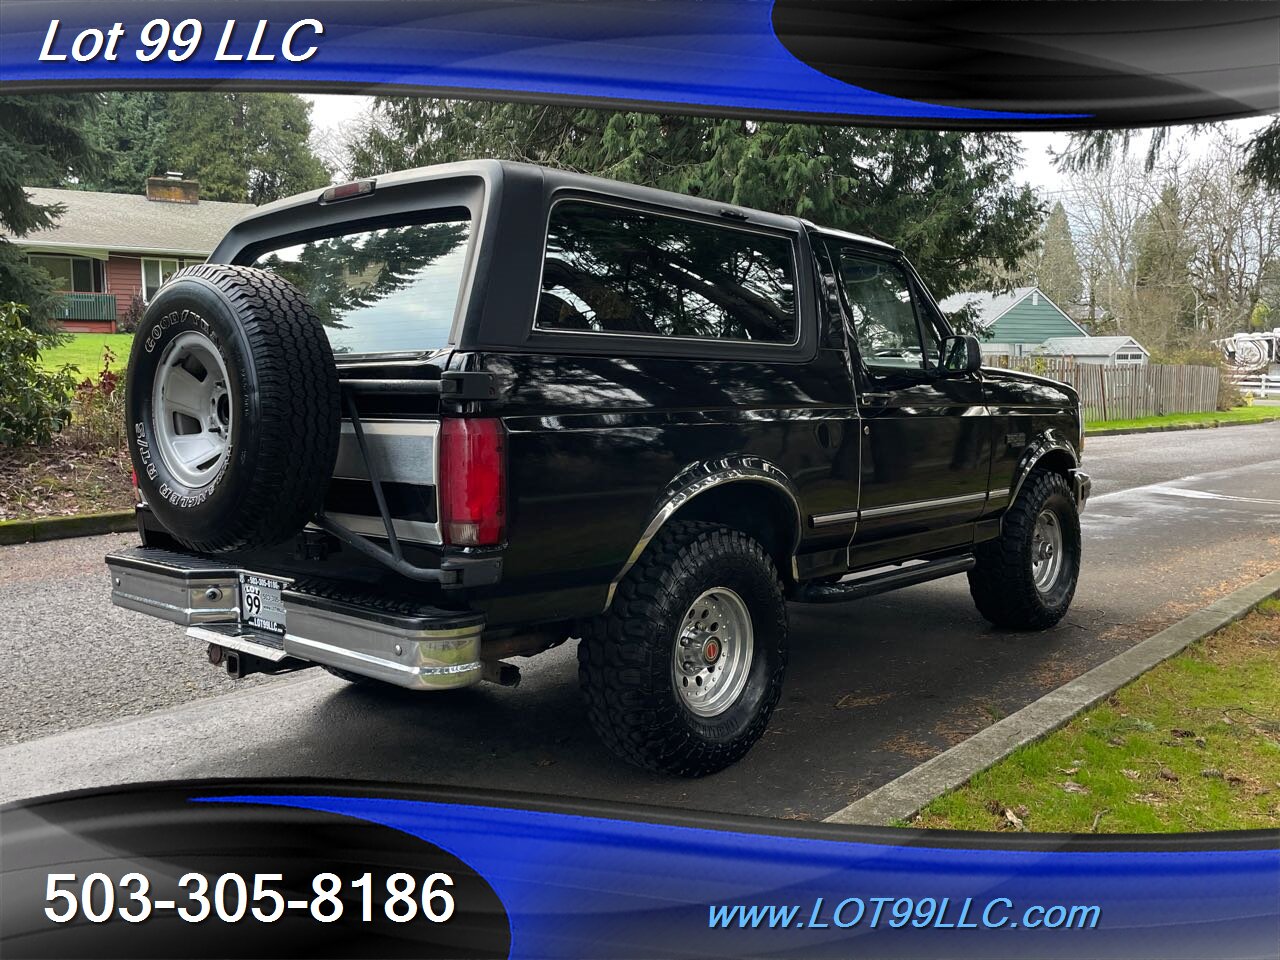 1993 Ford Bronco XLT 4x4 5.8L V8 New 33 " Tires and Carpet KIT   - Photo 6 - Milwaukie, OR 97267